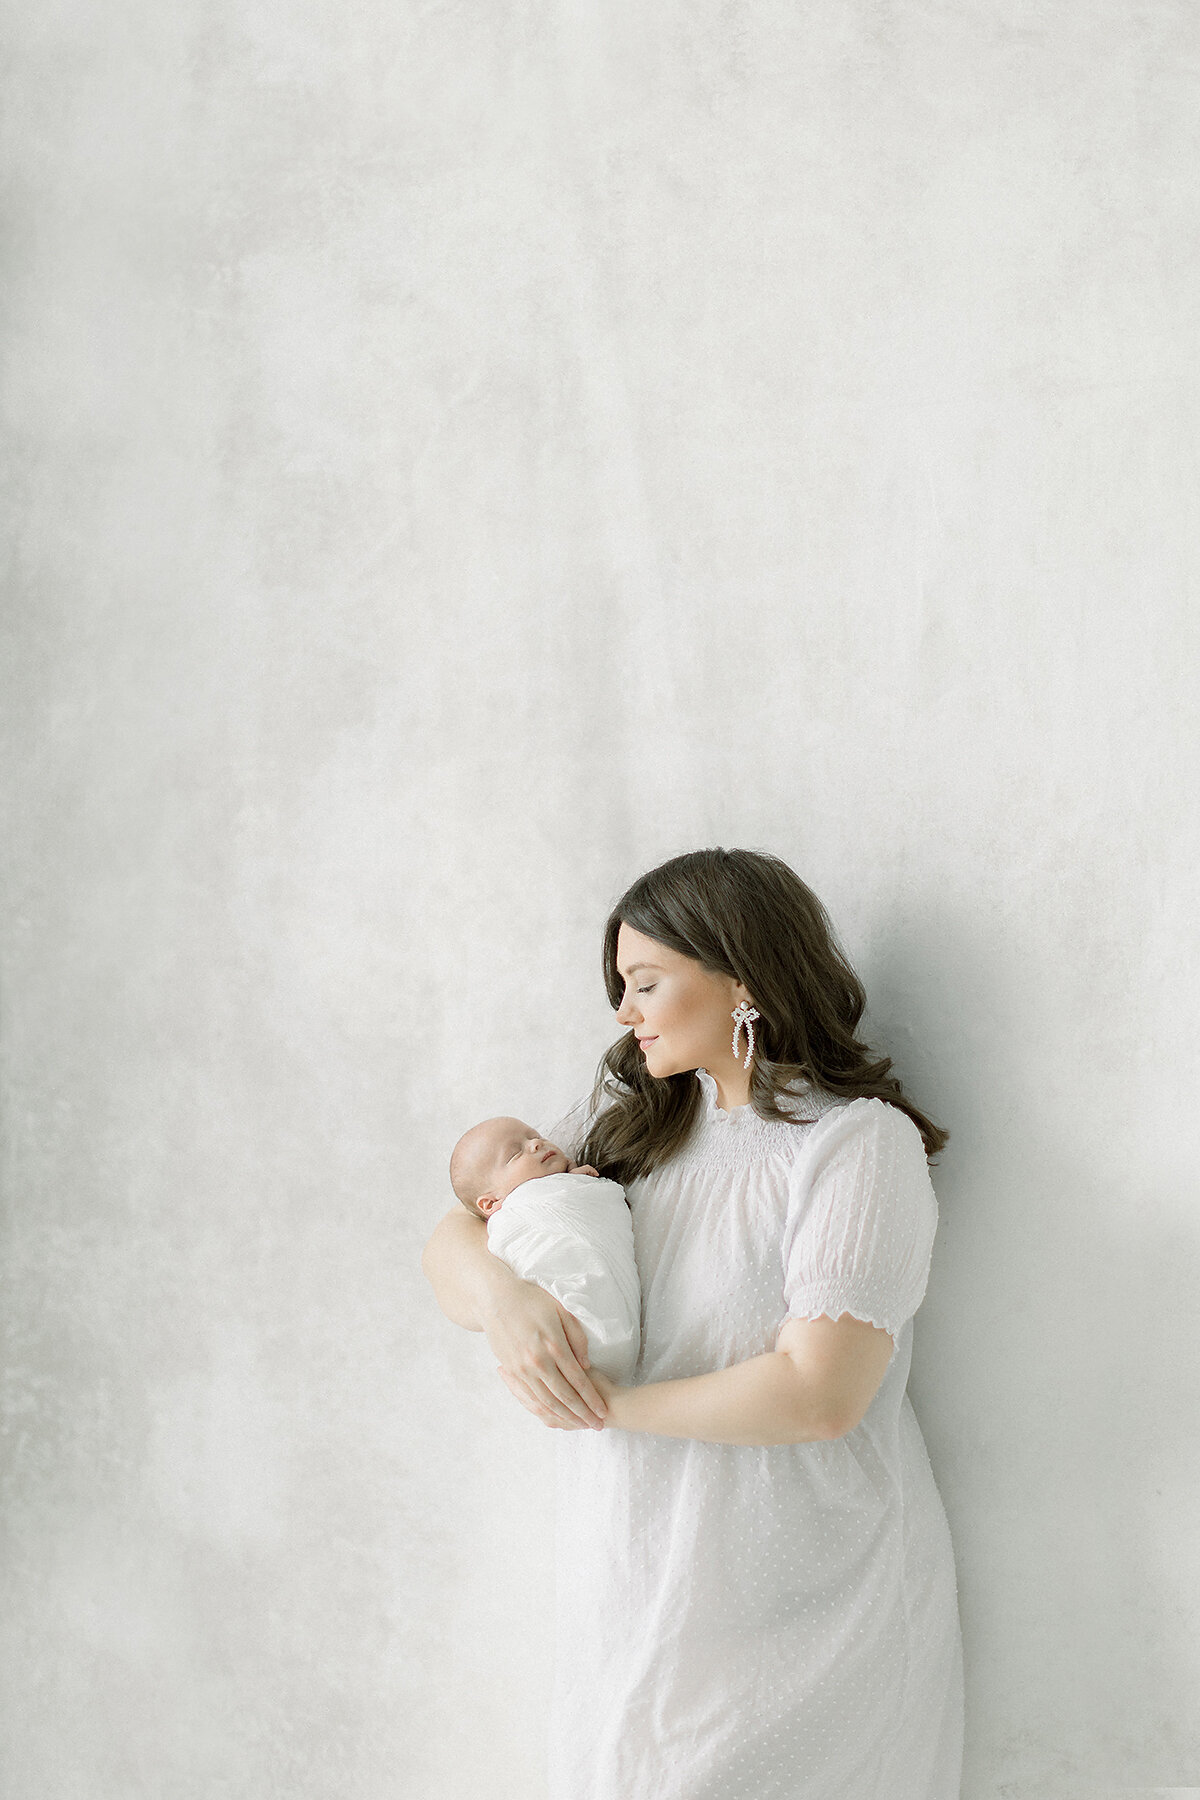 Newborn portrait of a new mother posing in front of a window for a studio family session at a photography studio located in the Dallas/Fort Worth area.